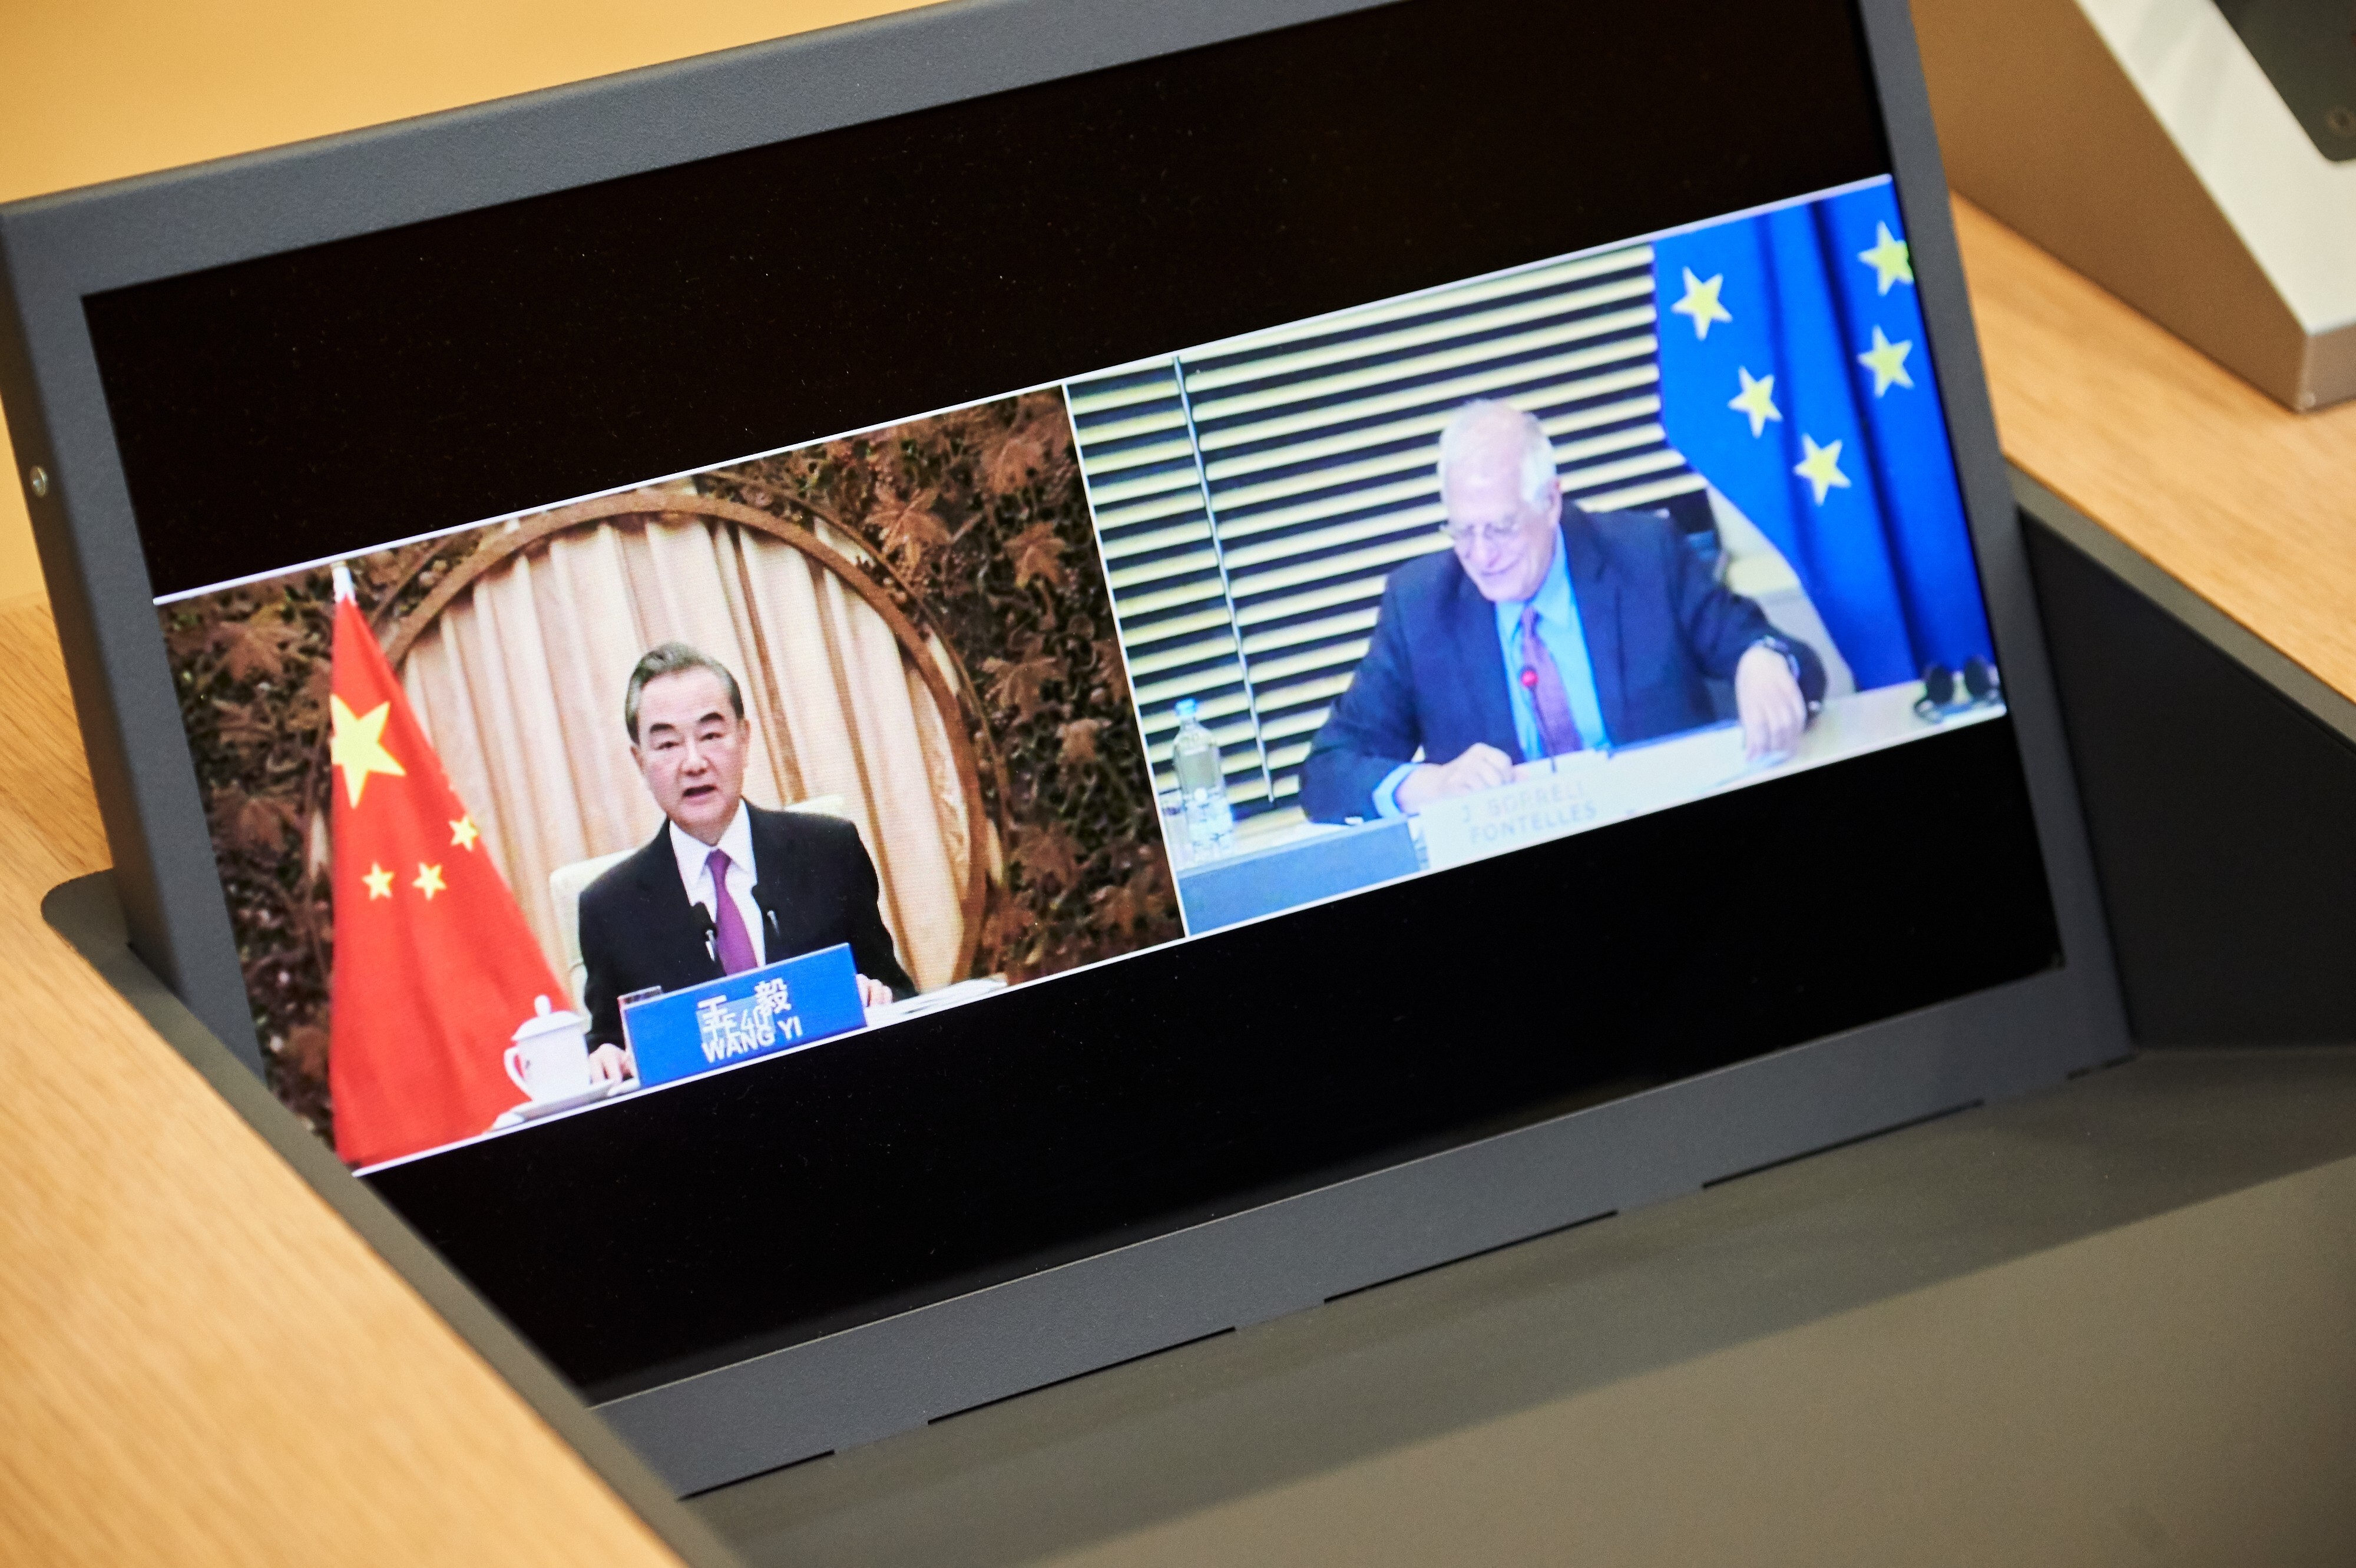 Chinese Foreign Minister Wang Yi (left) and EU foreign policy chief Josep Borrell take part in a virtual meeting as part of the EU-China Strategic Dialogue on June 9. Photo: Dati Bendo/European Commission via dpa